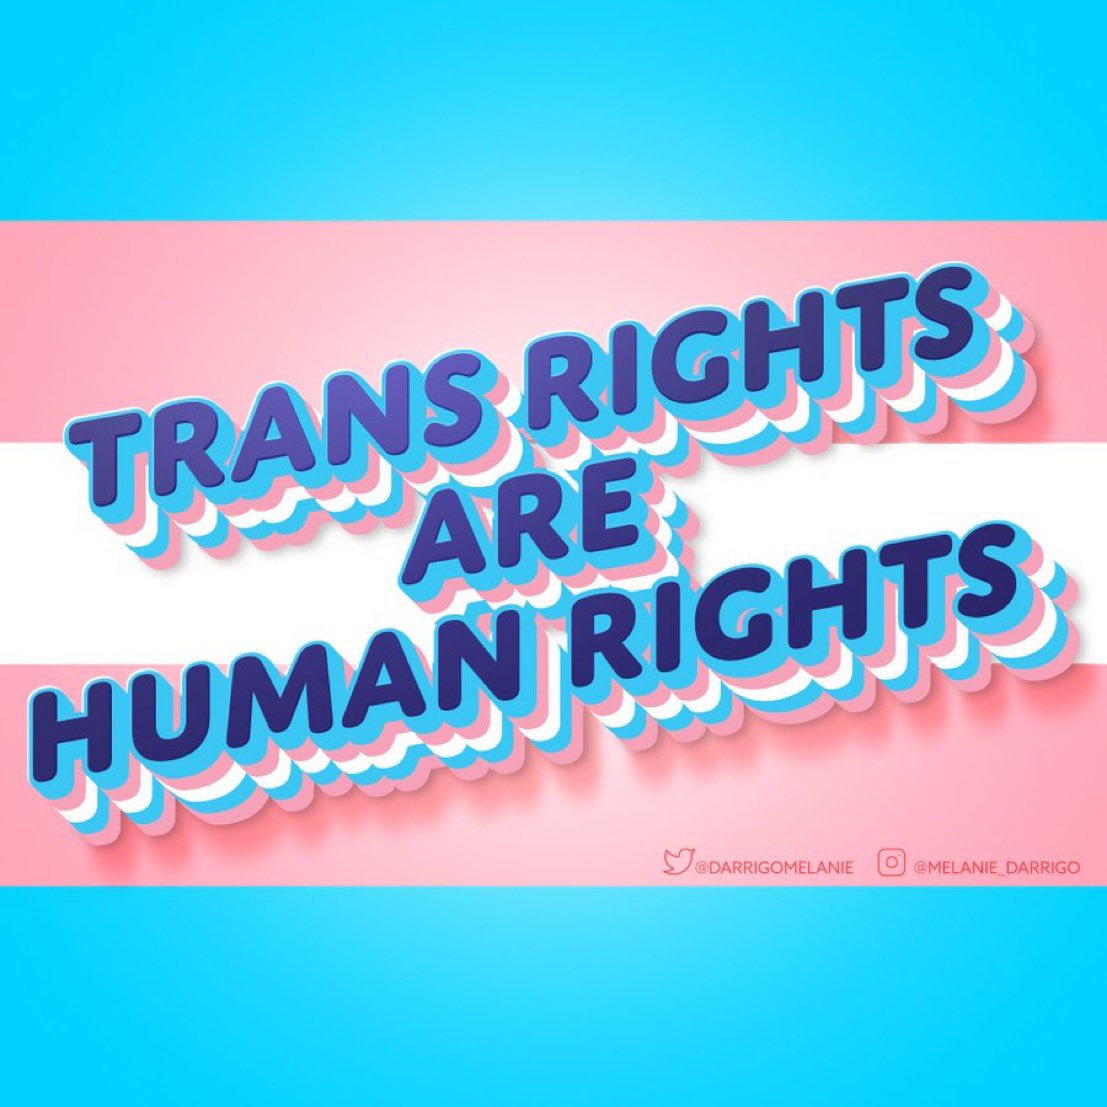 Everyone has a right to be who they are, not who others force them to be. Trans rights are human rights — so when trans rights are under attack, human rights are under attack. #TransDayOfVisibility